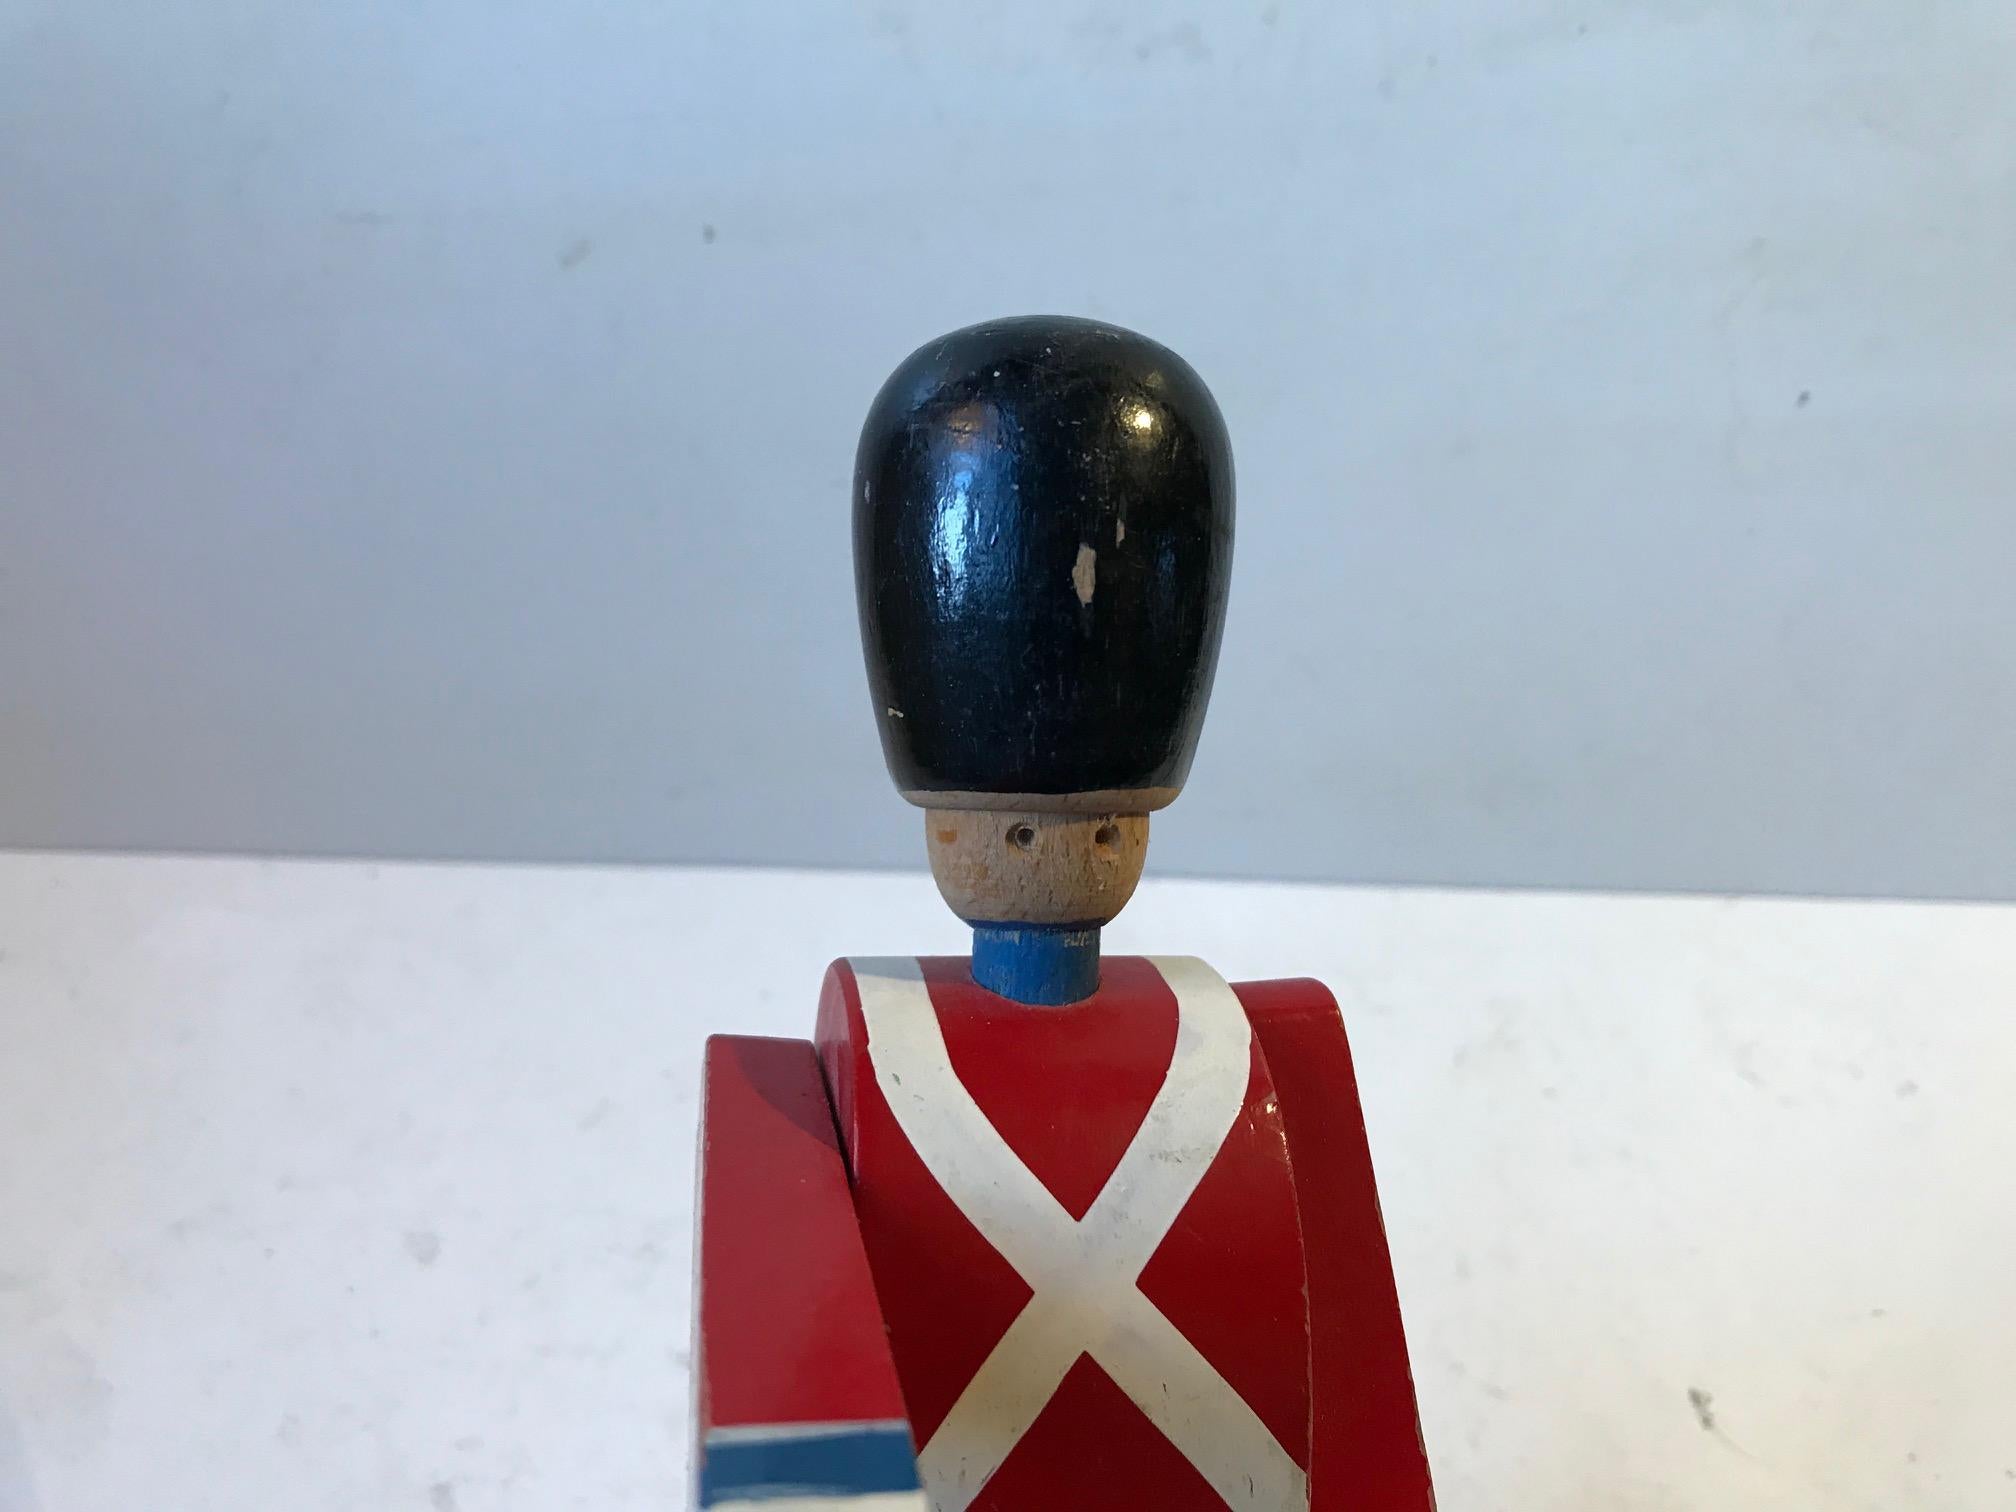 Vintage Kings Guardsman Wood Toy by Kay Bojesen, 1970s In Good Condition For Sale In Esbjerg, DK